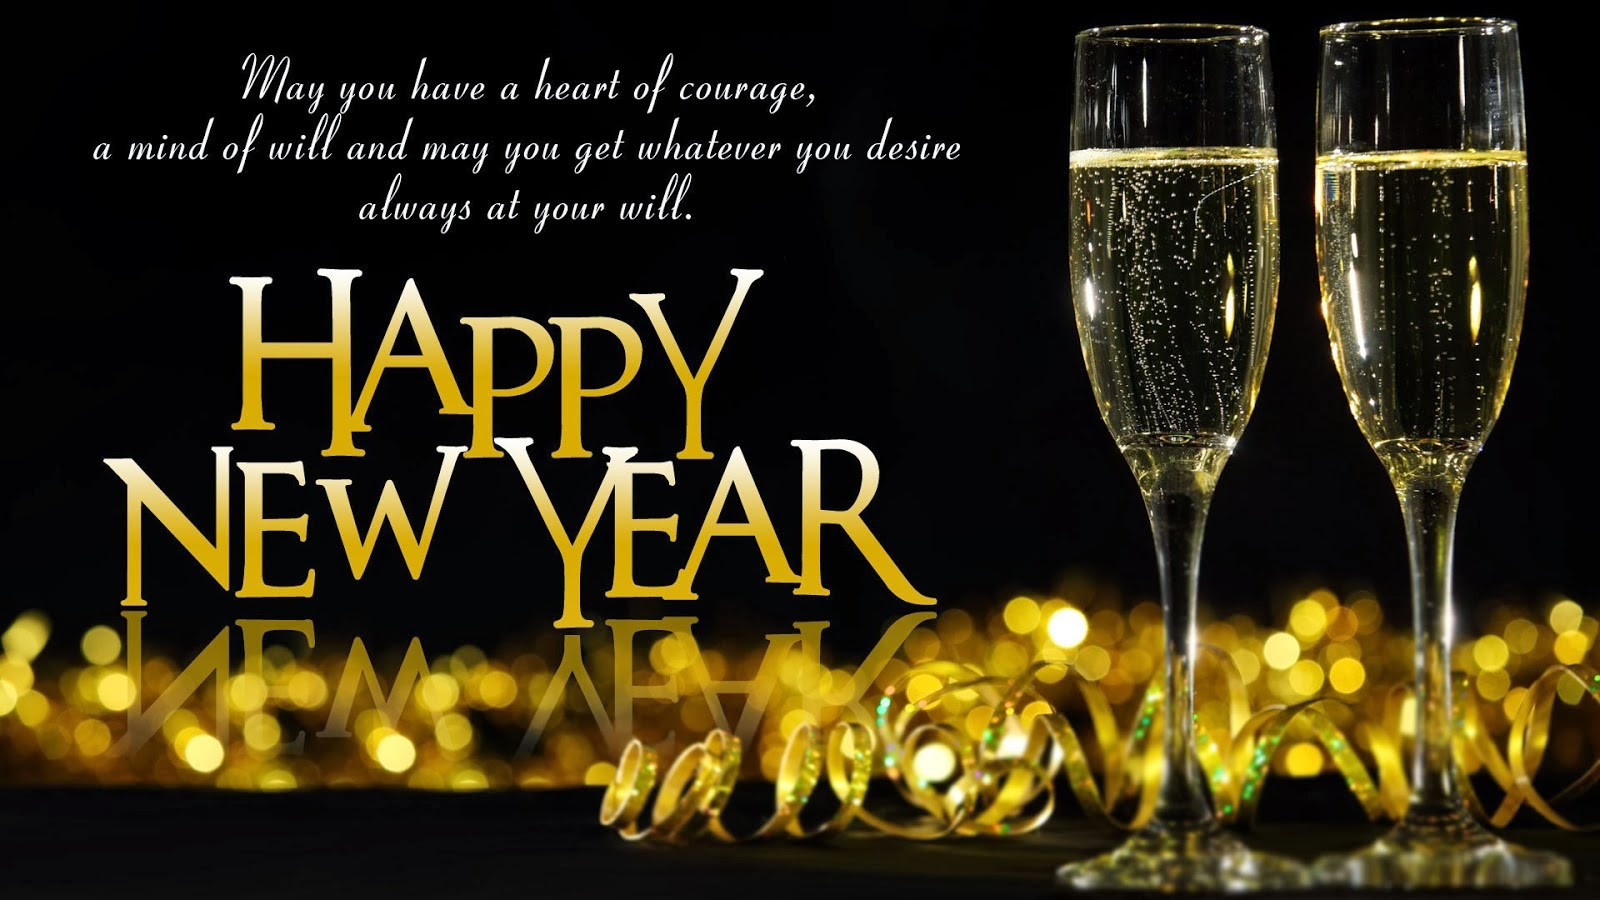 New Year Quotes Images
 New Year 2015 Inspirational Quotes QuotesGram